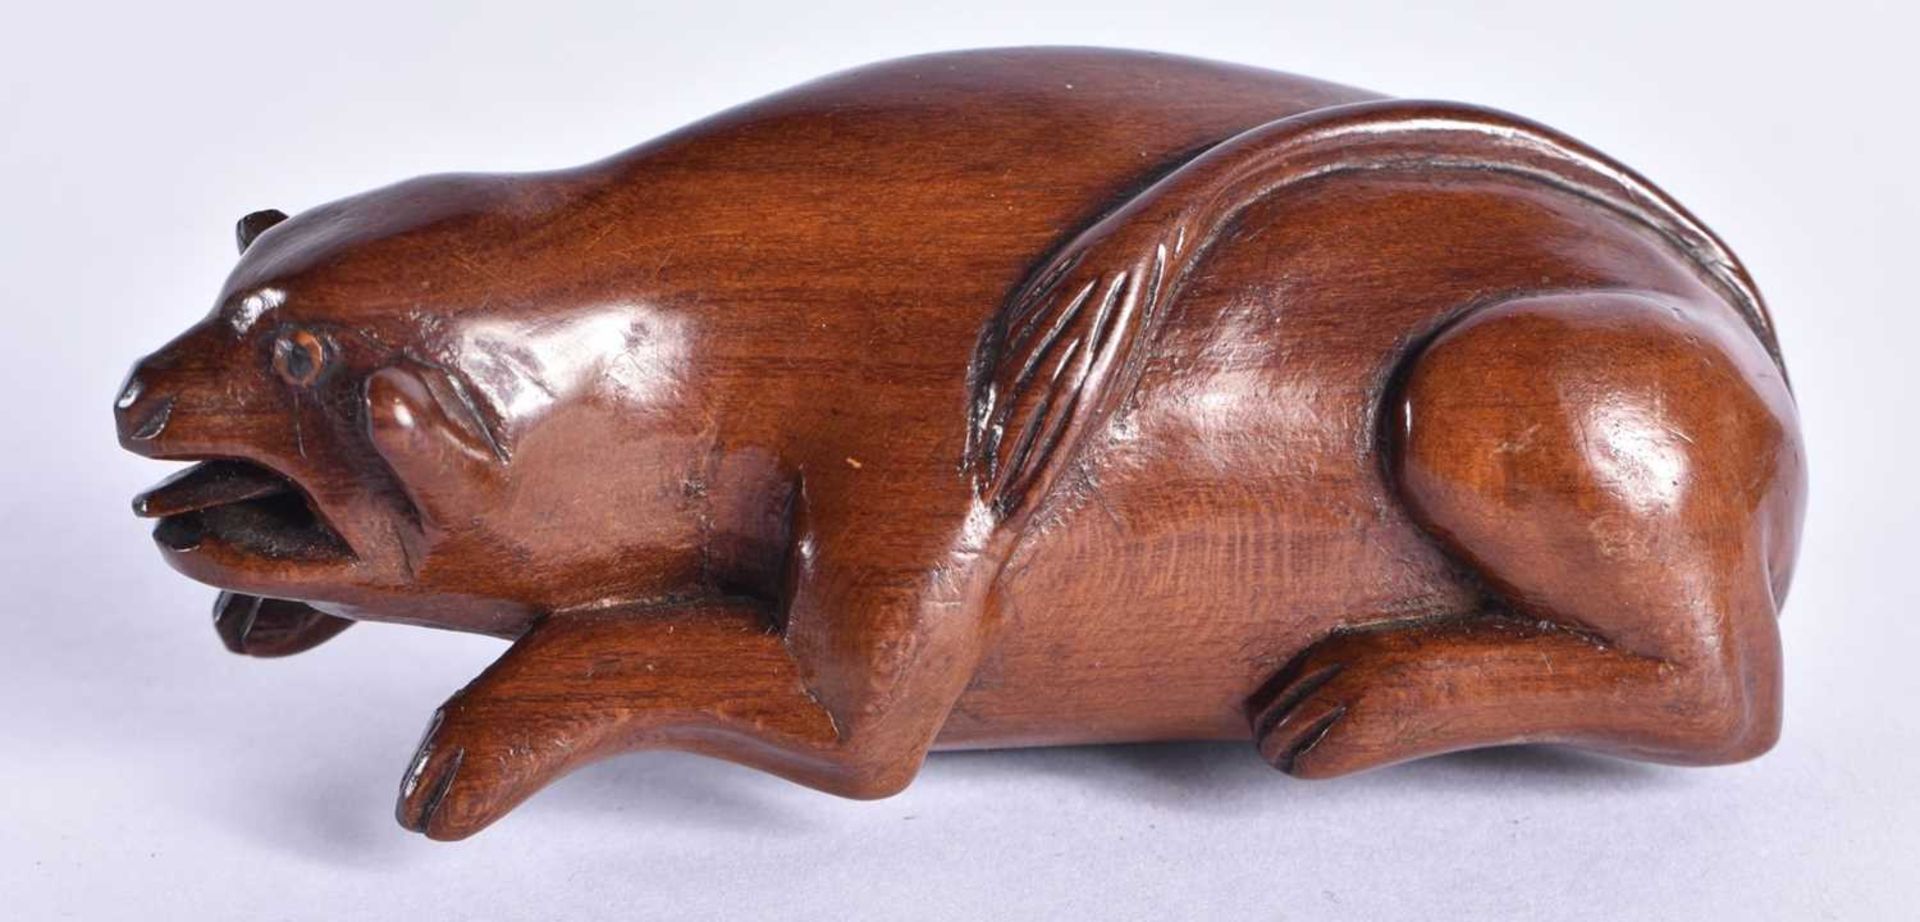 A LATE 18TH CENTURY CARVED TREEN WOOD SNUFF BOX formed as a stylised animals, with mouth open and